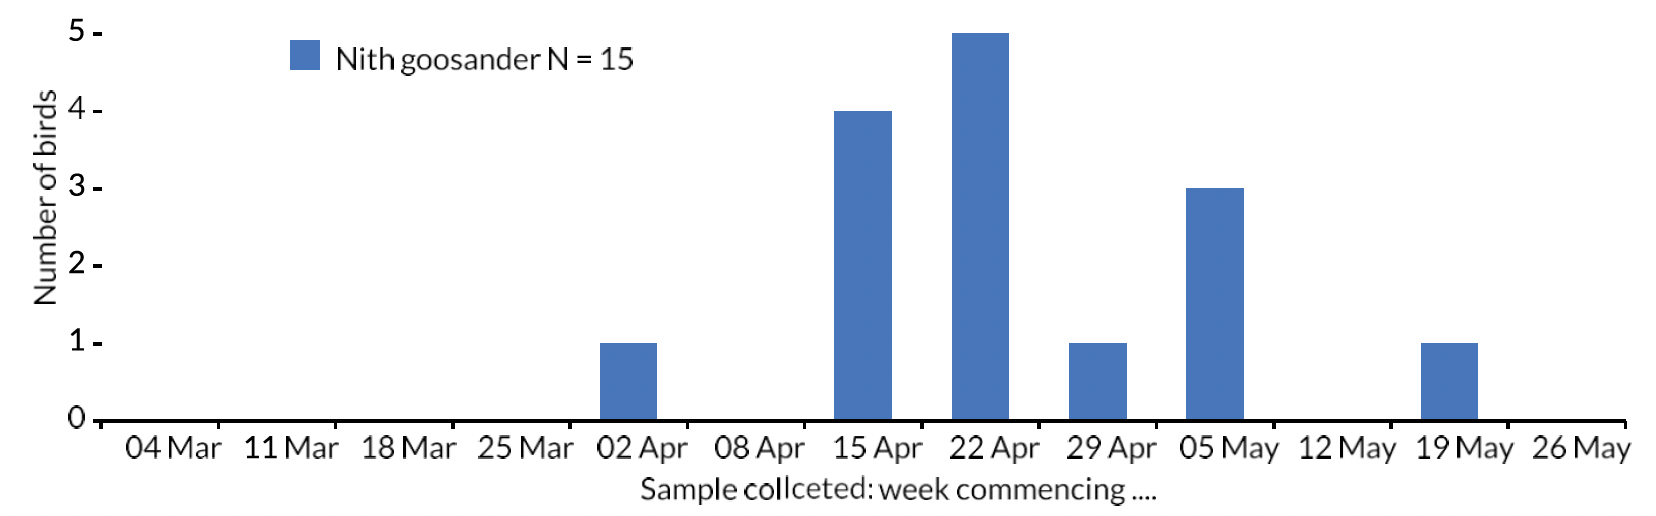 Bar chart of the number of River Nith Goosanders collected each week during the 2019 smolt run period.